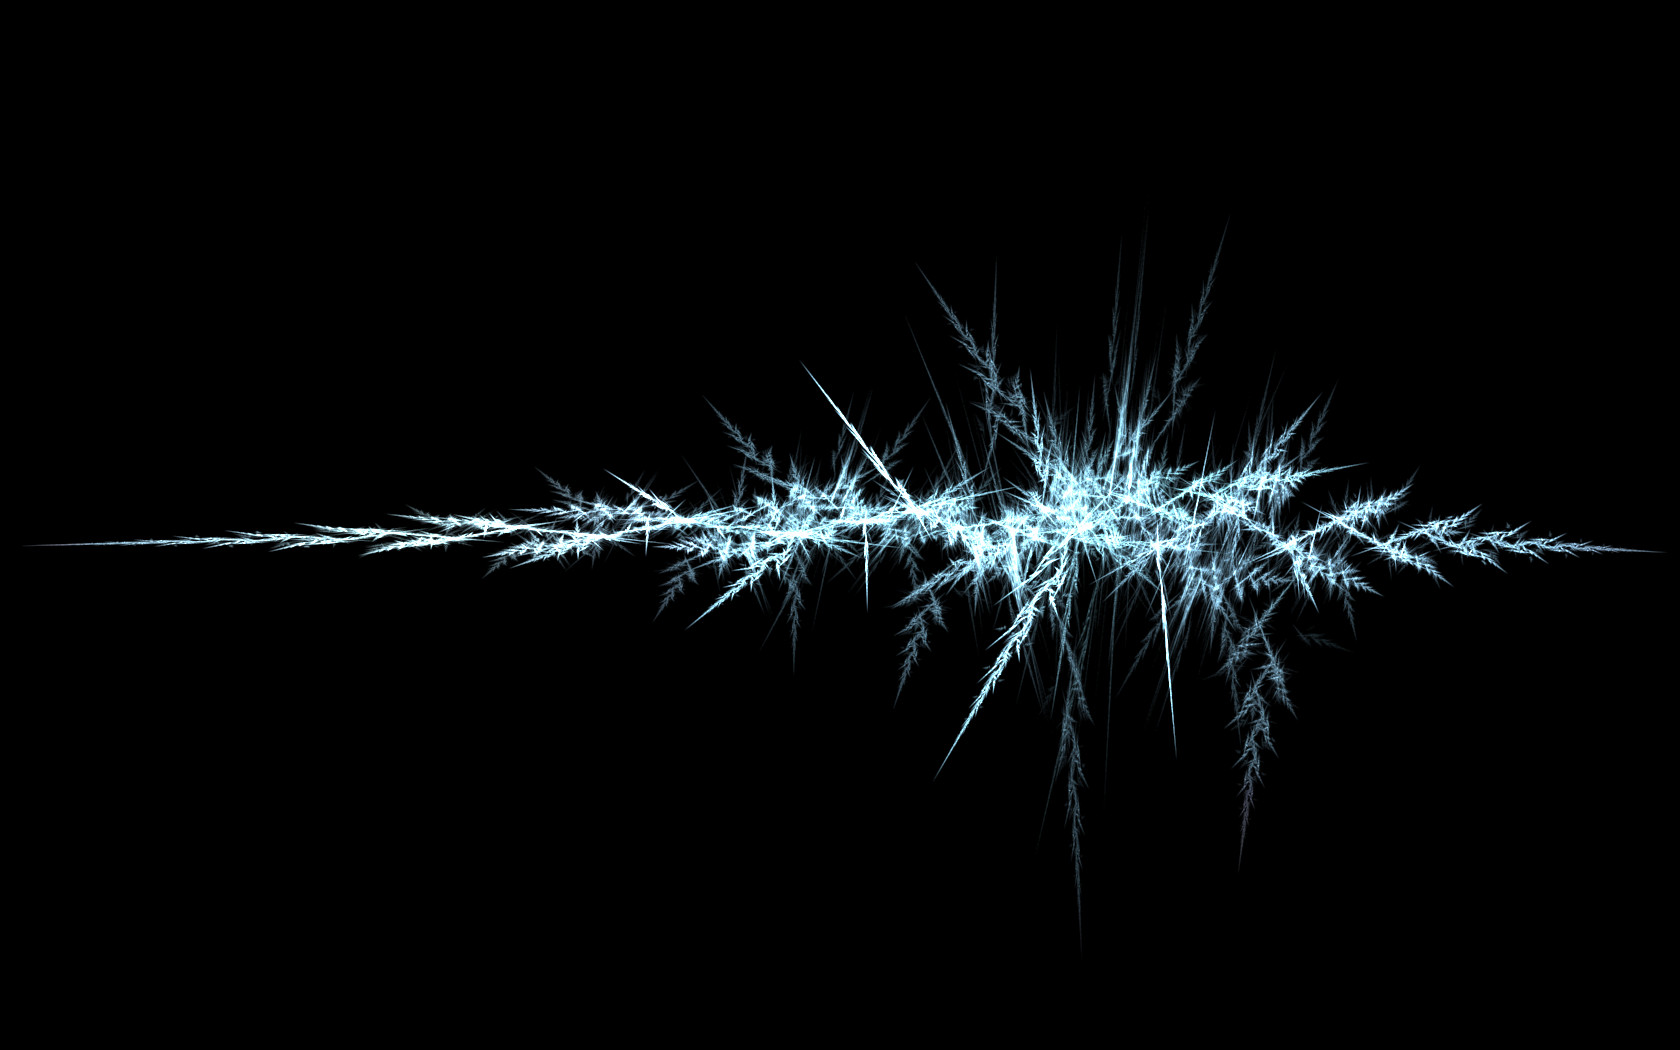 Dark Abstract 1663 Hd Wallpapers in Abstract   Imagescicom 1680x1050